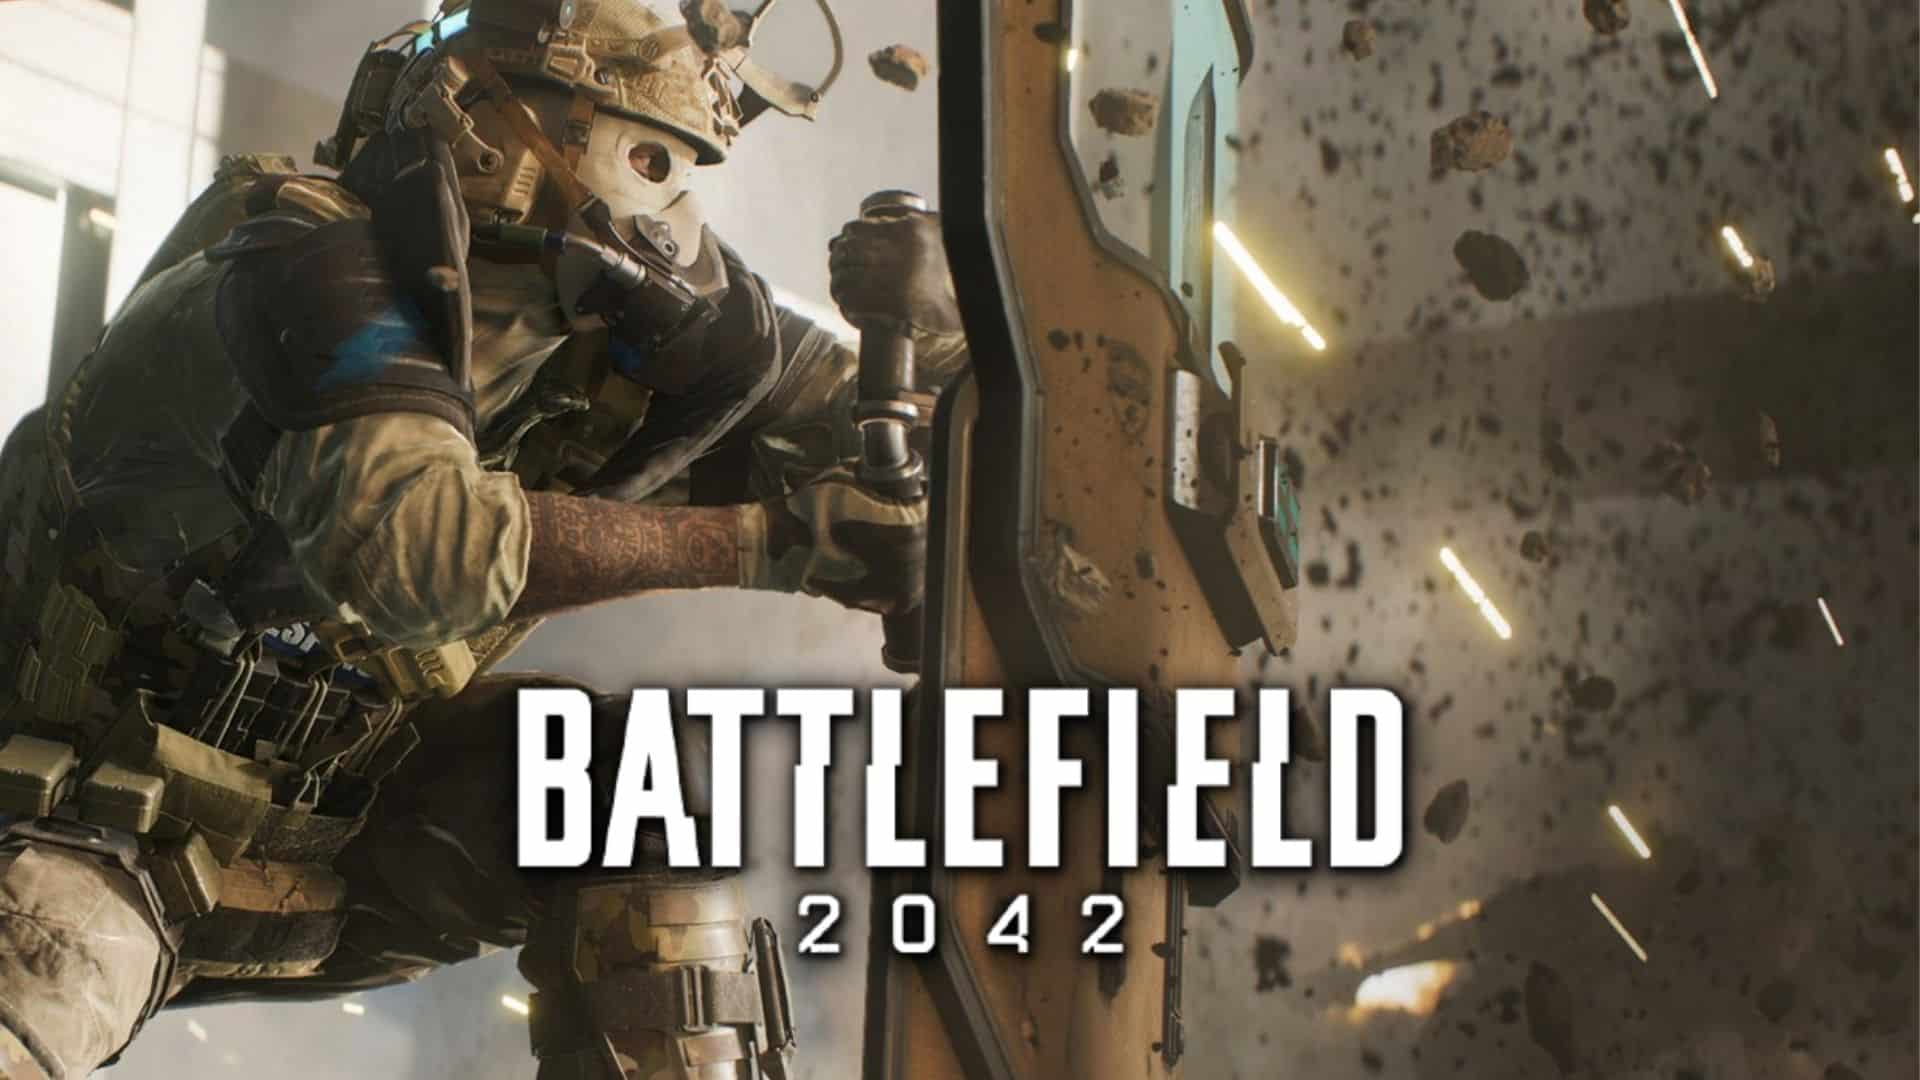 Battlefield 2042 Update 3.2 Patch Notes: Class System, New Weapons + Map  Changes - Battlefield 2042 Tracker